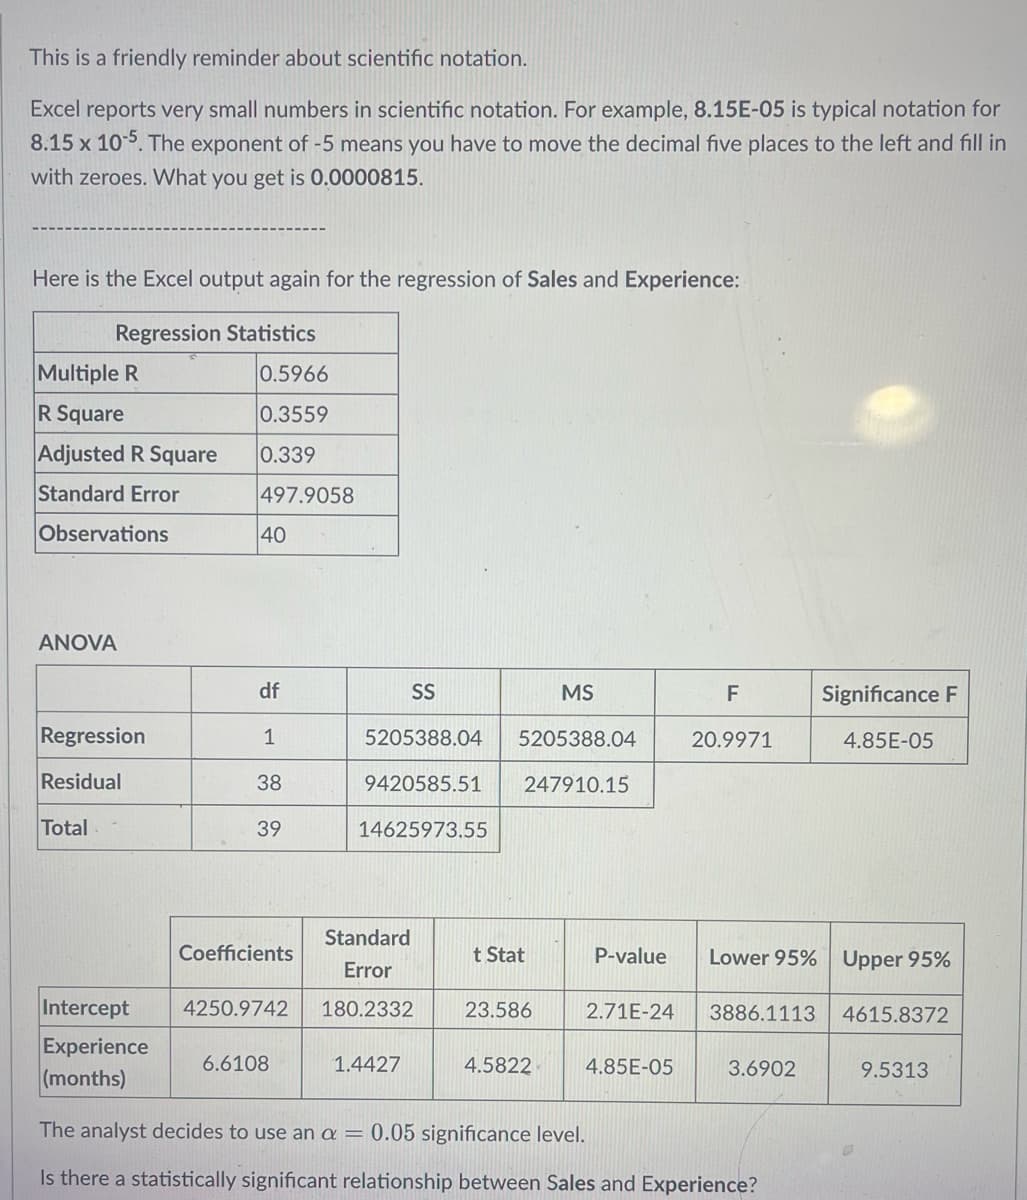 This is a friendly reminder about scientific notation.
Excel reports very small numbers in scientific notation. For example, 8.15E-05 is typical notation for
8.15 x 10-5. The exponent of -5 means you have to move the decimal five places to the left and fill in
with zeroes. What you get is 0.0000815.
Here is the Excel output again for the regression of Sales and Experience:
Regression Statistics
0.5966
0.3559
0.339
497.9058
Multiple R
R Square
Adjusted R Square
Standard Error
Observations
ANOVA
Regression
Residual
Total
Intercept
Experience
(months)
40
df
1
38
39
Coefficients
6.6108
SS
MS
5205388.04 5205388.04
9420585.51
Standard
Error
4250.9742 180.2332
14625973.55
1.4427
247910.15
t Stat
23.586
4.5822
P-value
2.71E-24
4.85E-05
F
20.9971
Lower 95% Upper 95%
Significance F
4.85E-05
3886.1113 4615.8372
3.6902
The analyst decides to use an a = 0.05 significance level.
Is there a statistically significant relationship between Sales and Experience?
9.5313